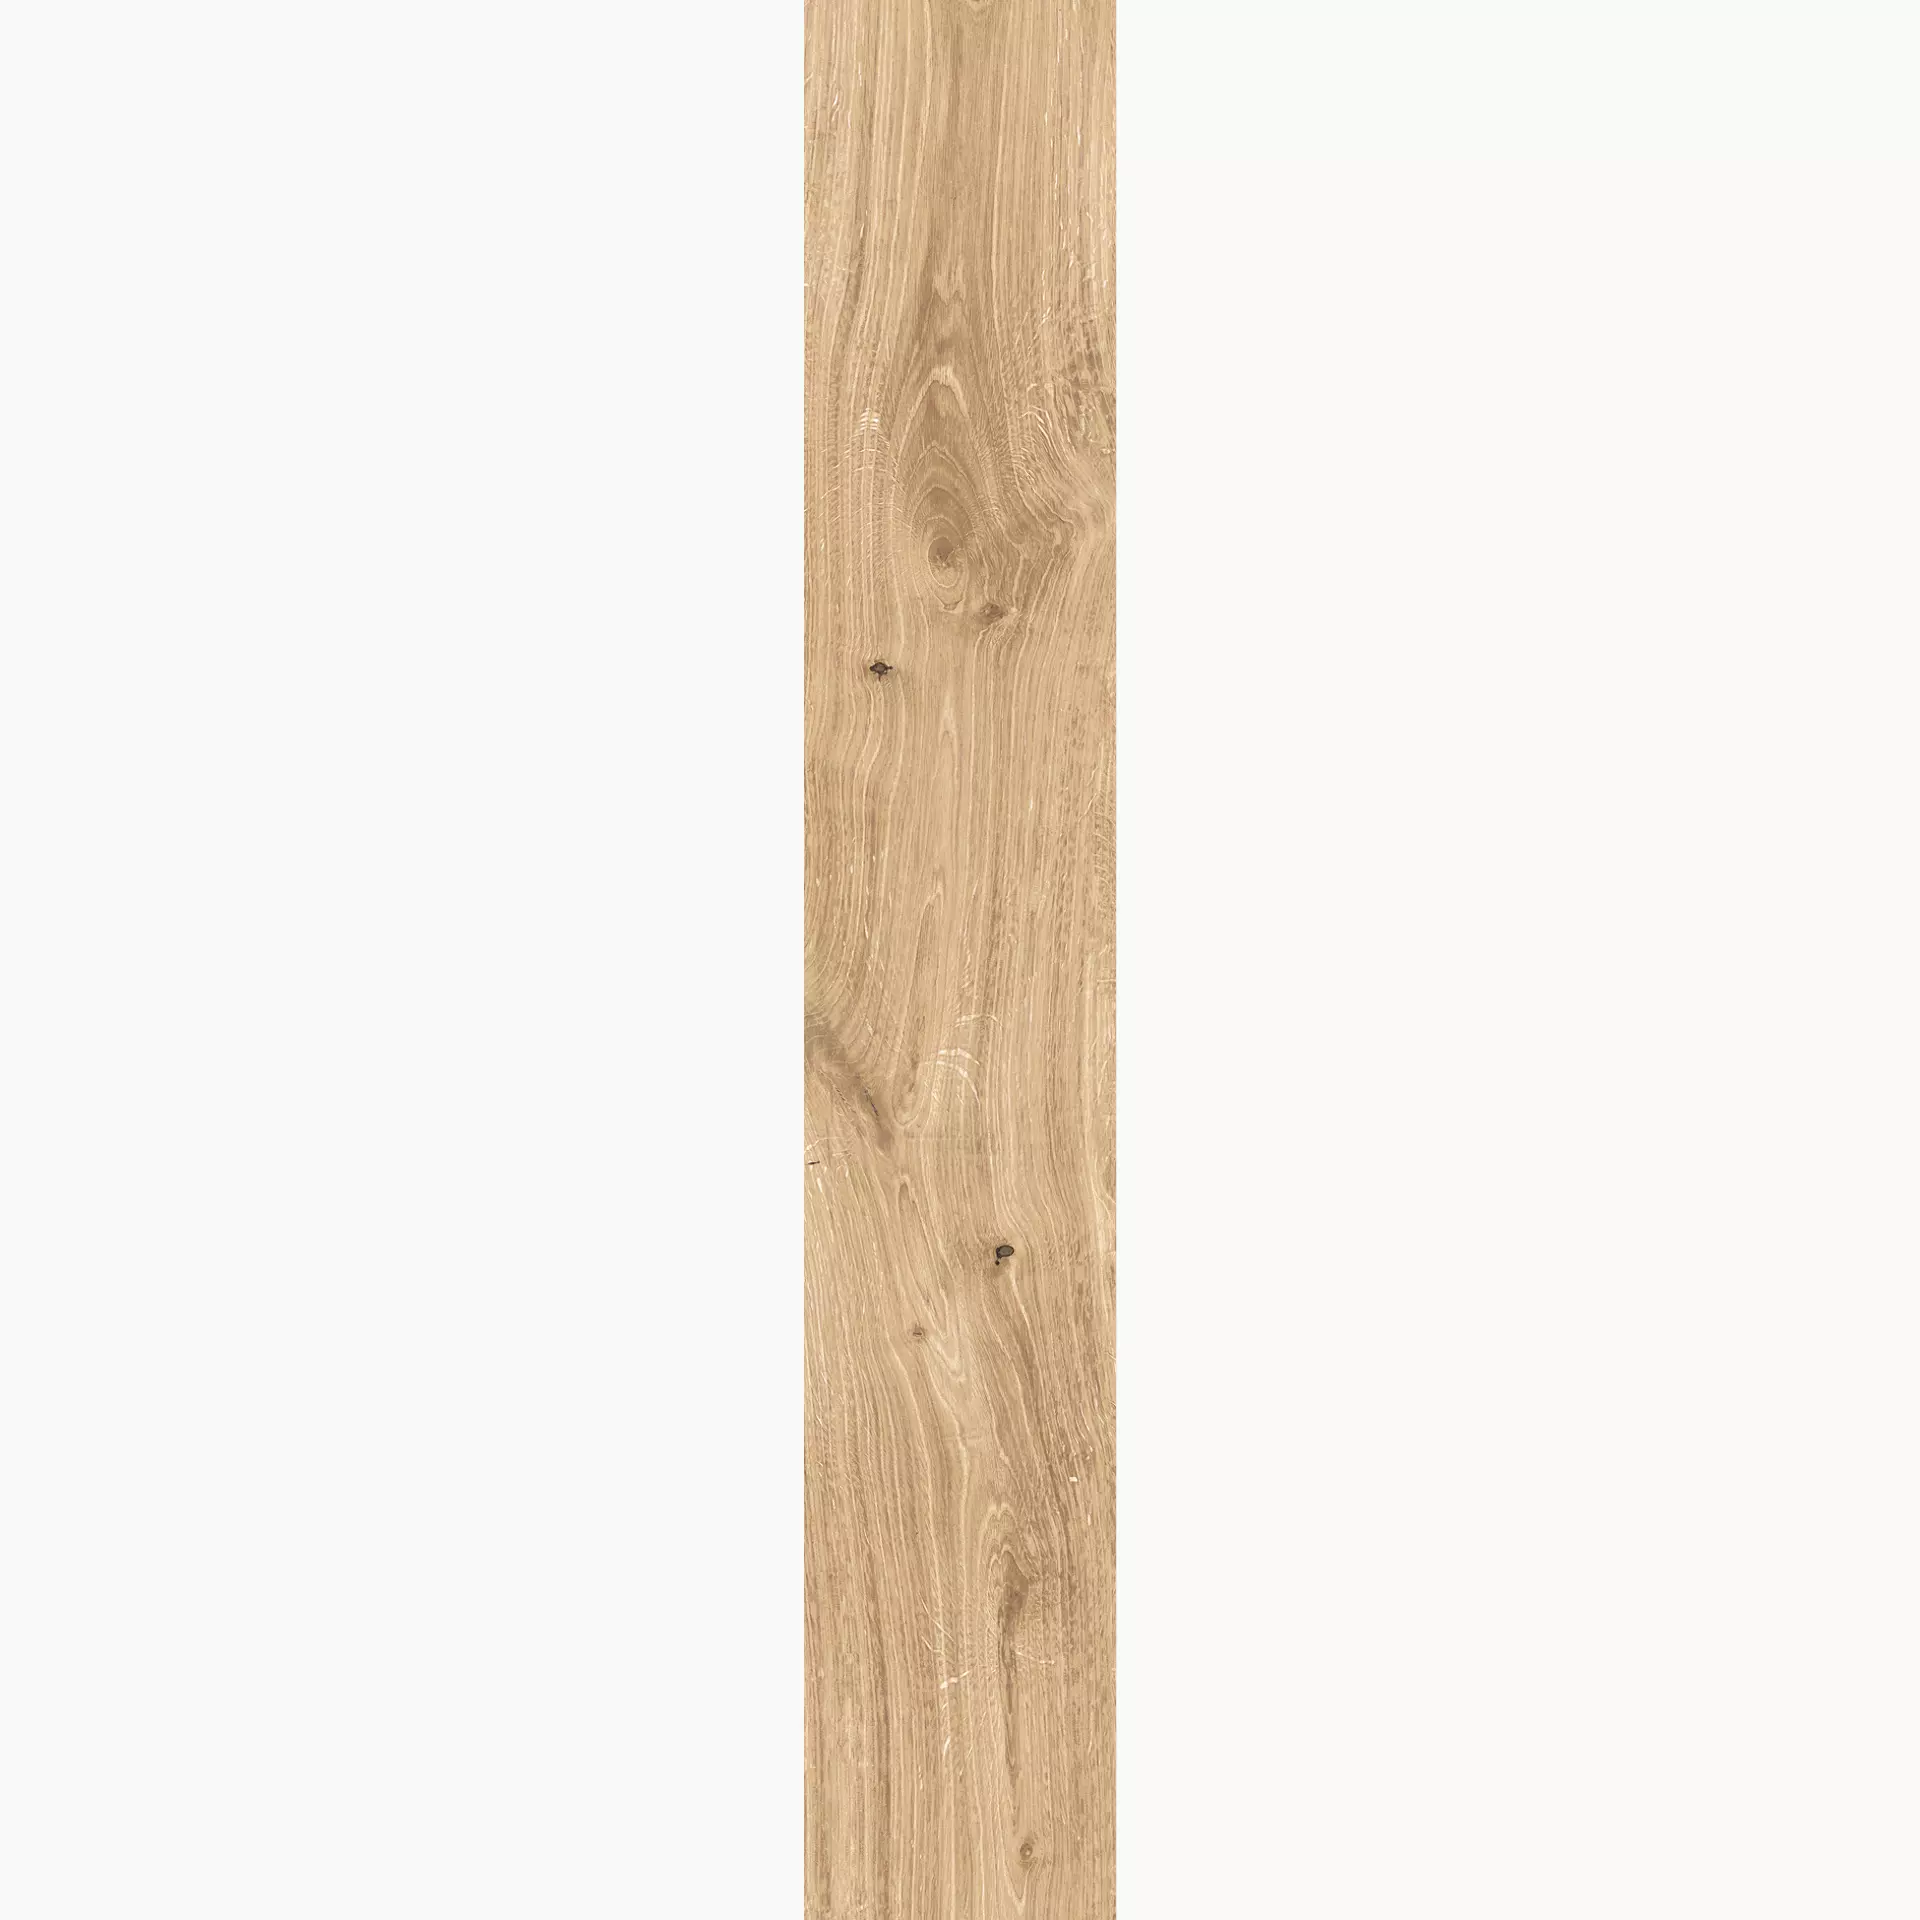 Novabell Artwood Honey Naturale AWD46RT 26x160cm rectified 9,5mm